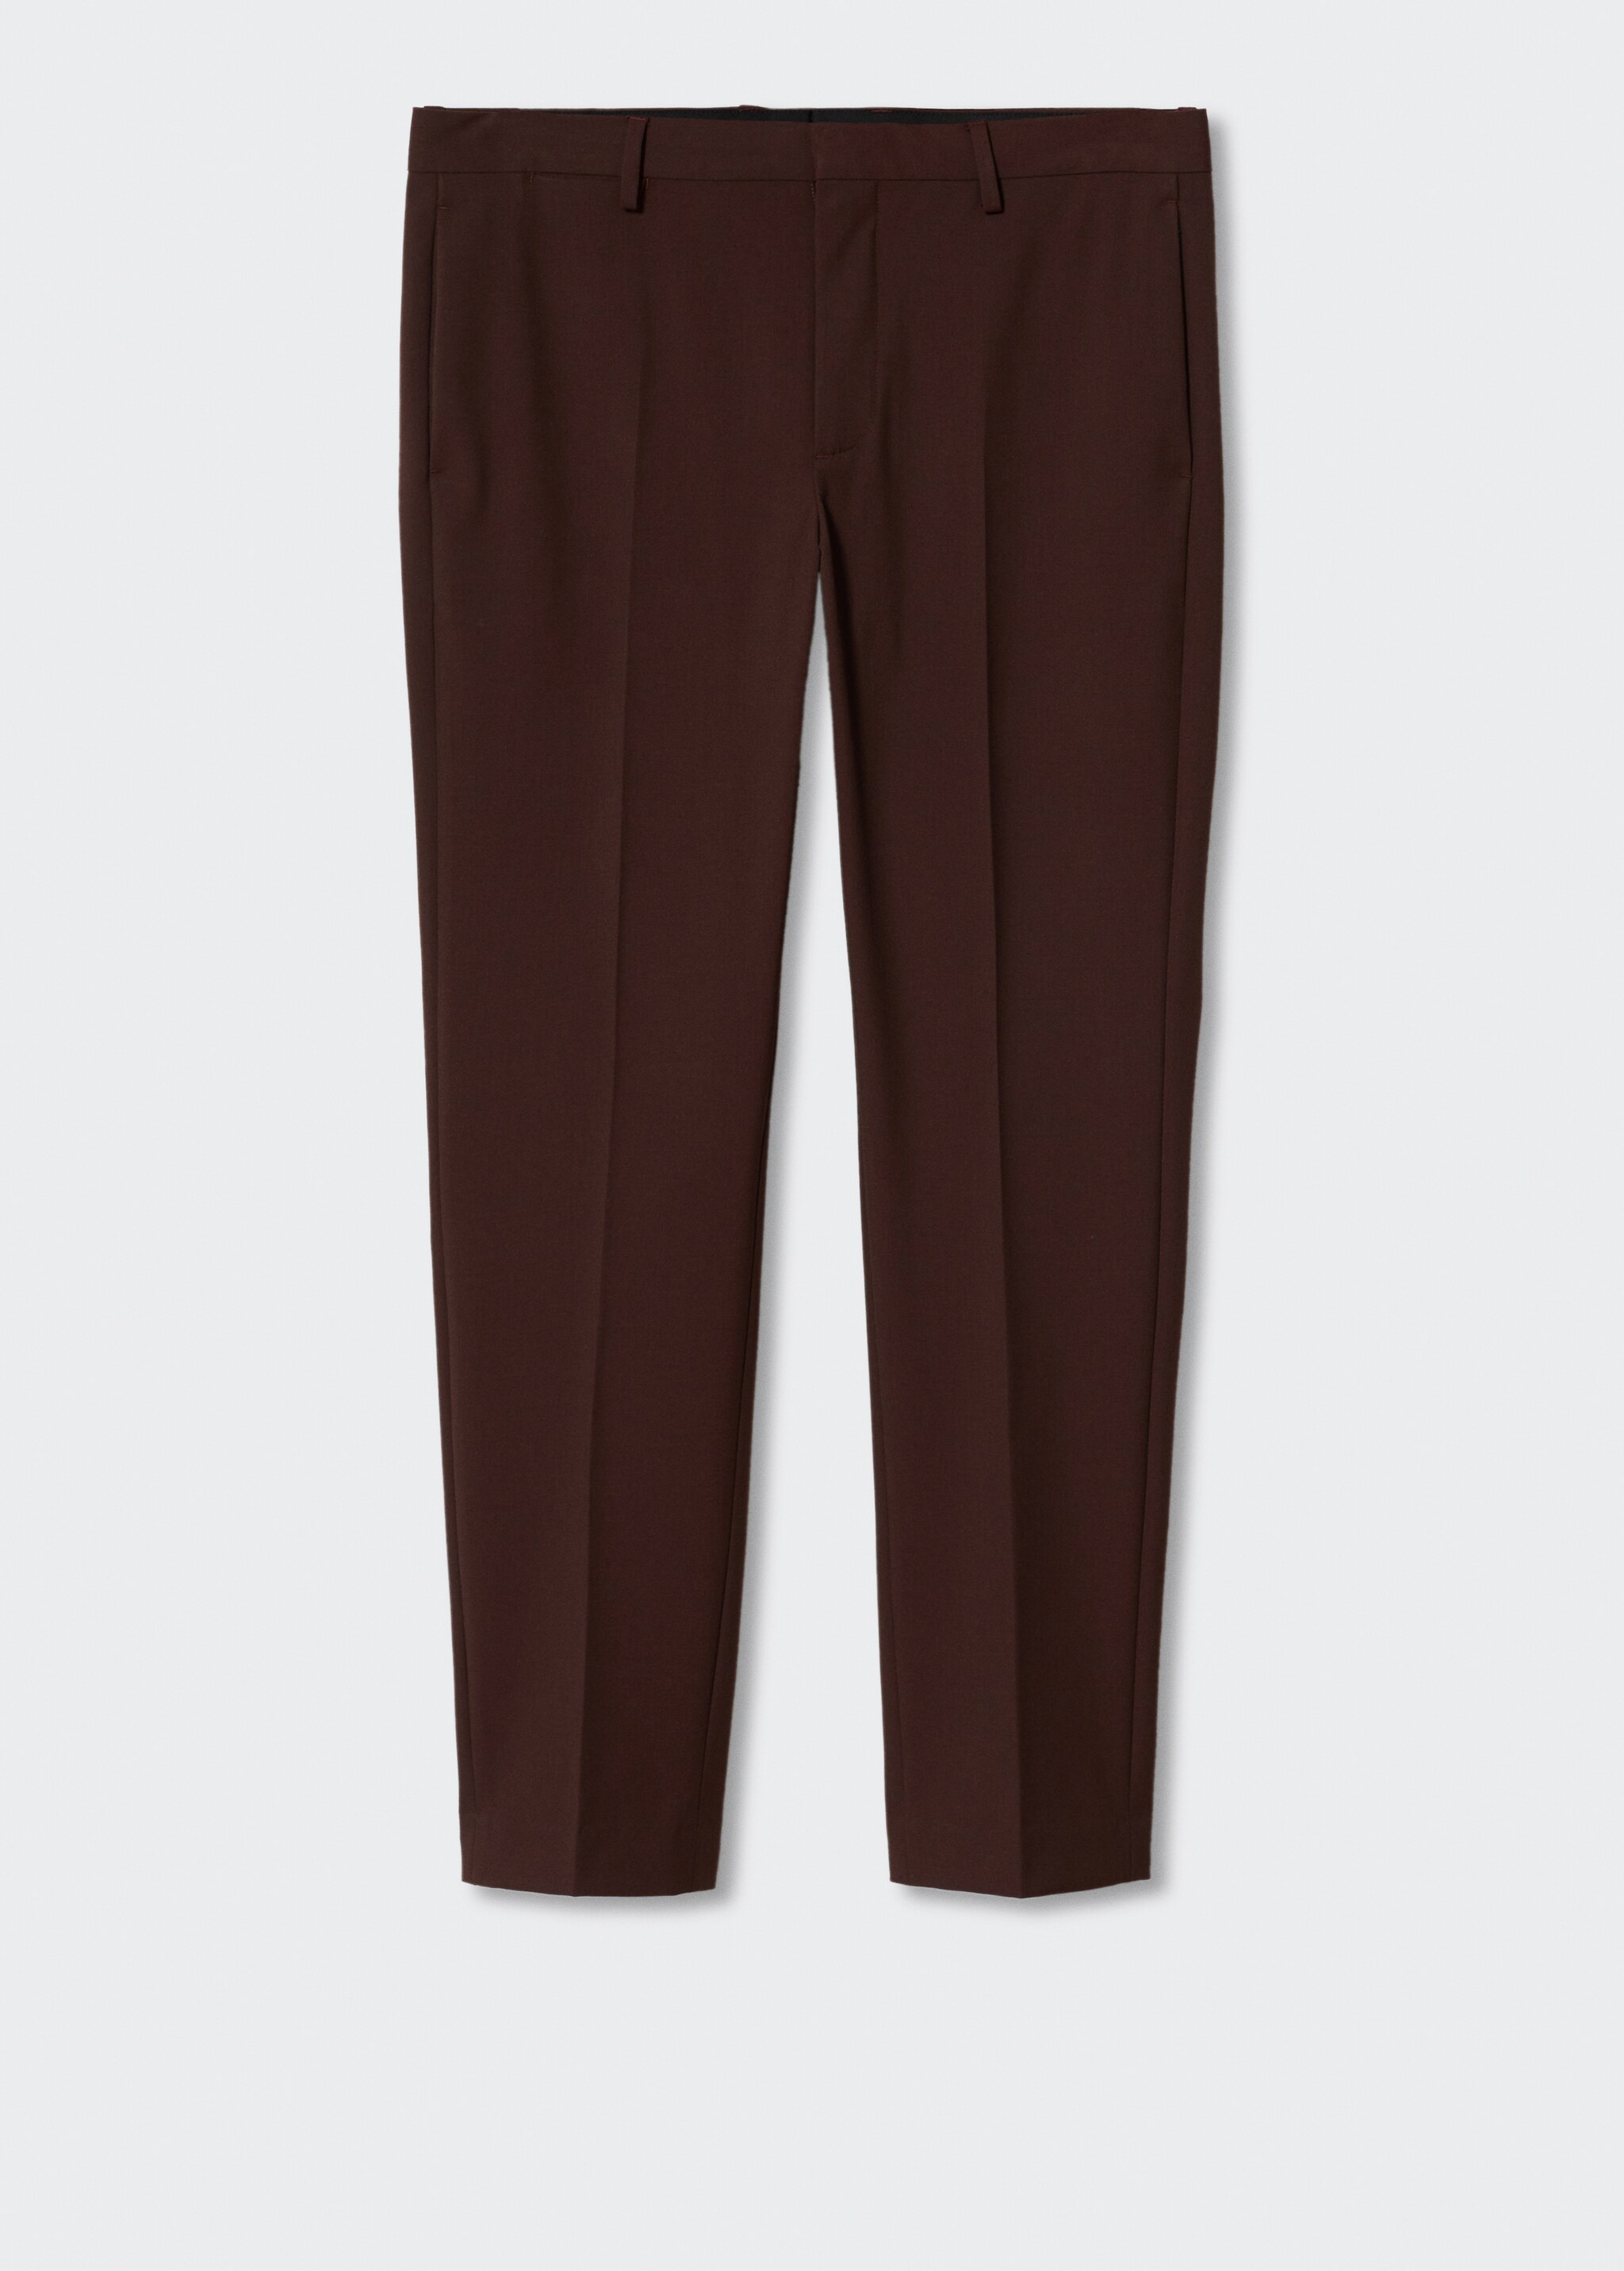 Super slim fit suit trousers - Article without model